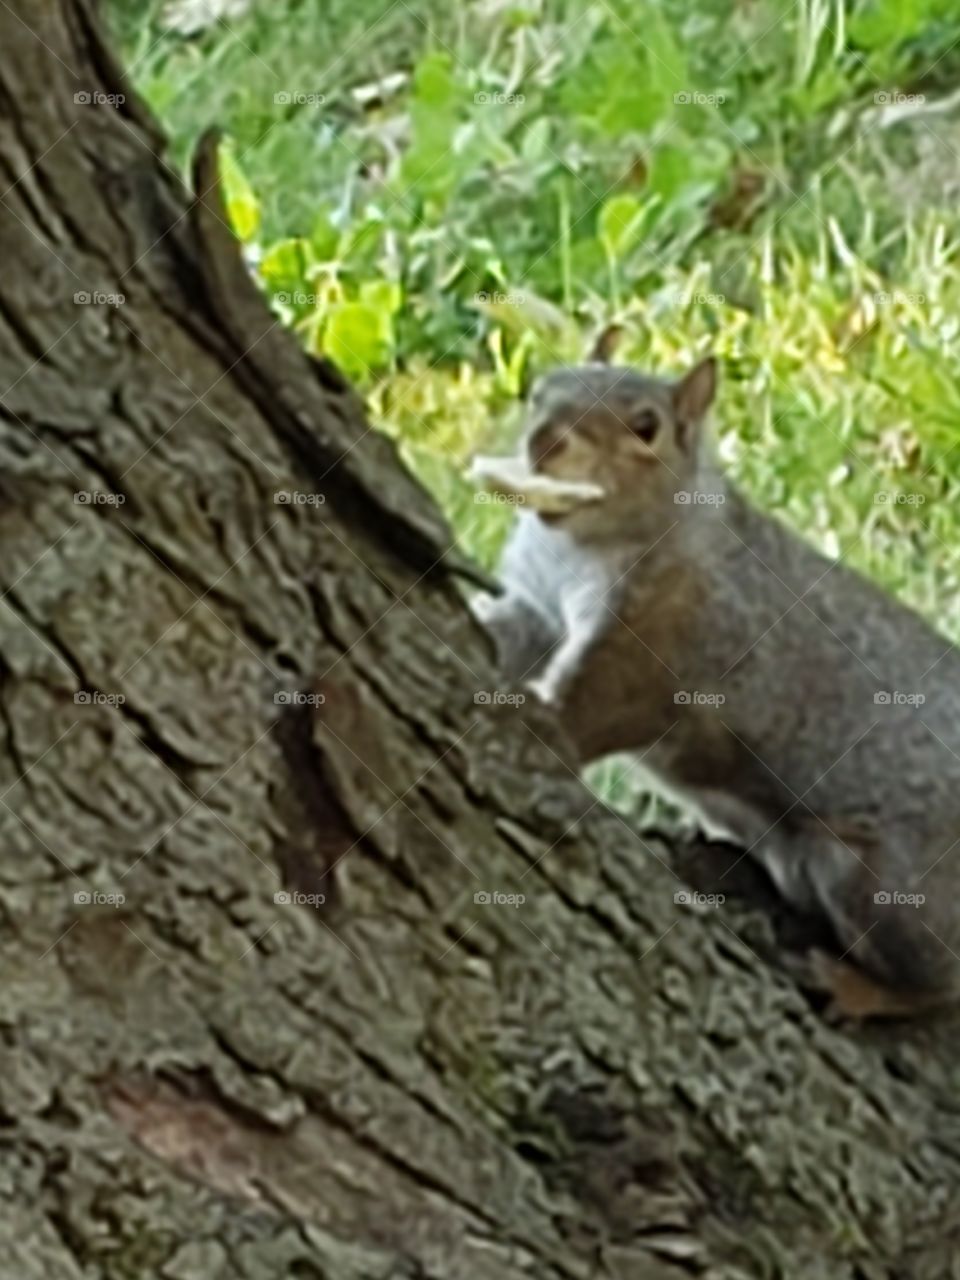 squirrel holding food in it's mouth